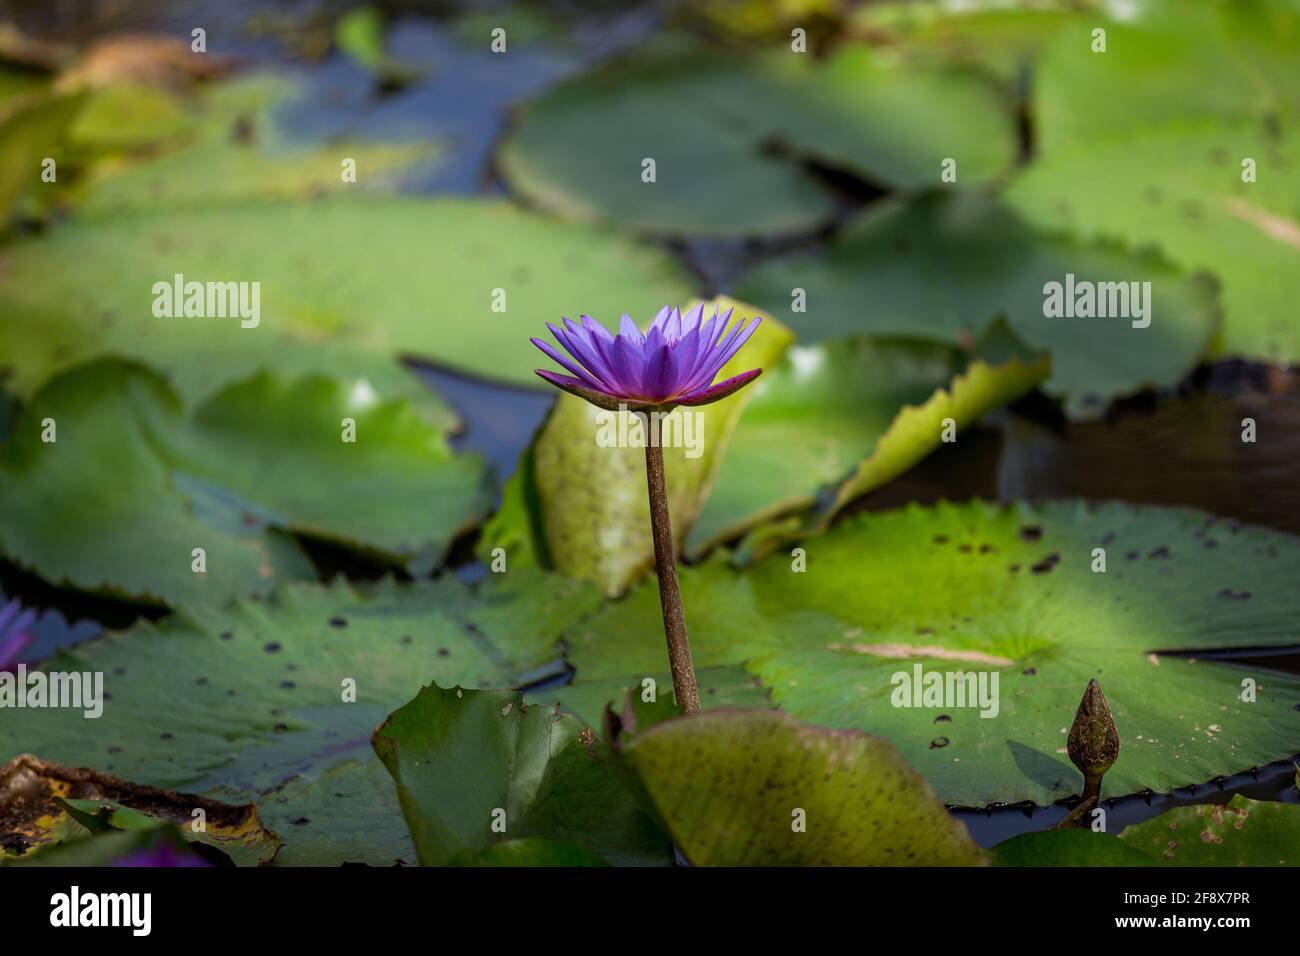 One purple water lilie flower among leaves on the water surface. Stock Photo